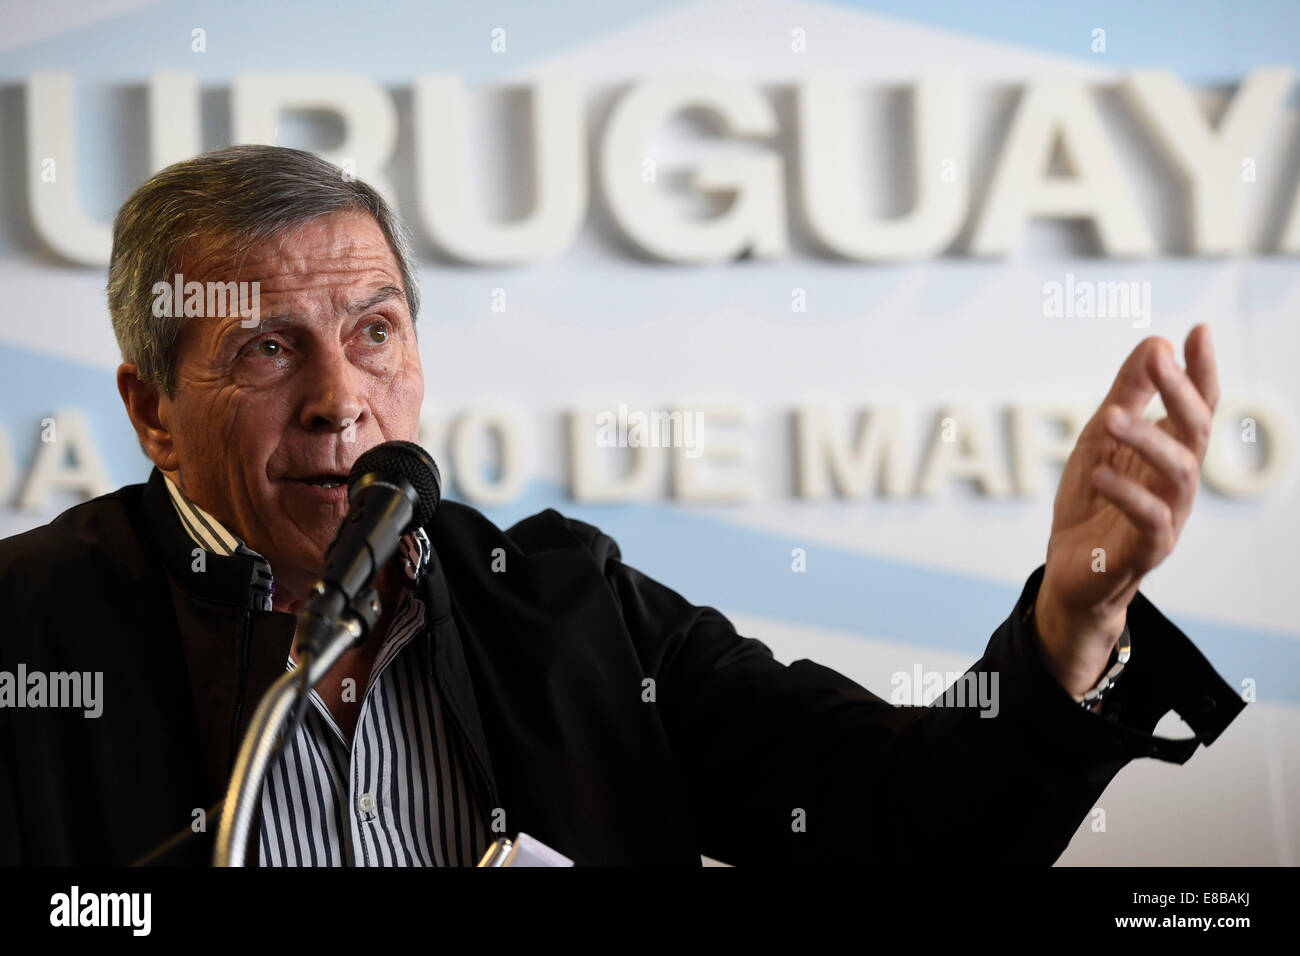 Montevideo, Uruguay. 3rd Oct, 2014. Uruguay's national soccer team head coach Oscar Washington Tabarez speaks during a press conference held at the headquarters of Uruguayan Football Association (AFU, for its acronym in Spanish) in Montevideo, capital of Uruguay, on Oct. 3, 2014. Tabarez renewed his contract with the AFU to lead the Uruguayan national soccer team until 2018 World Cup Russia. © Nicolas Celaya/Xinhua/Alamy Live News Stock Photo